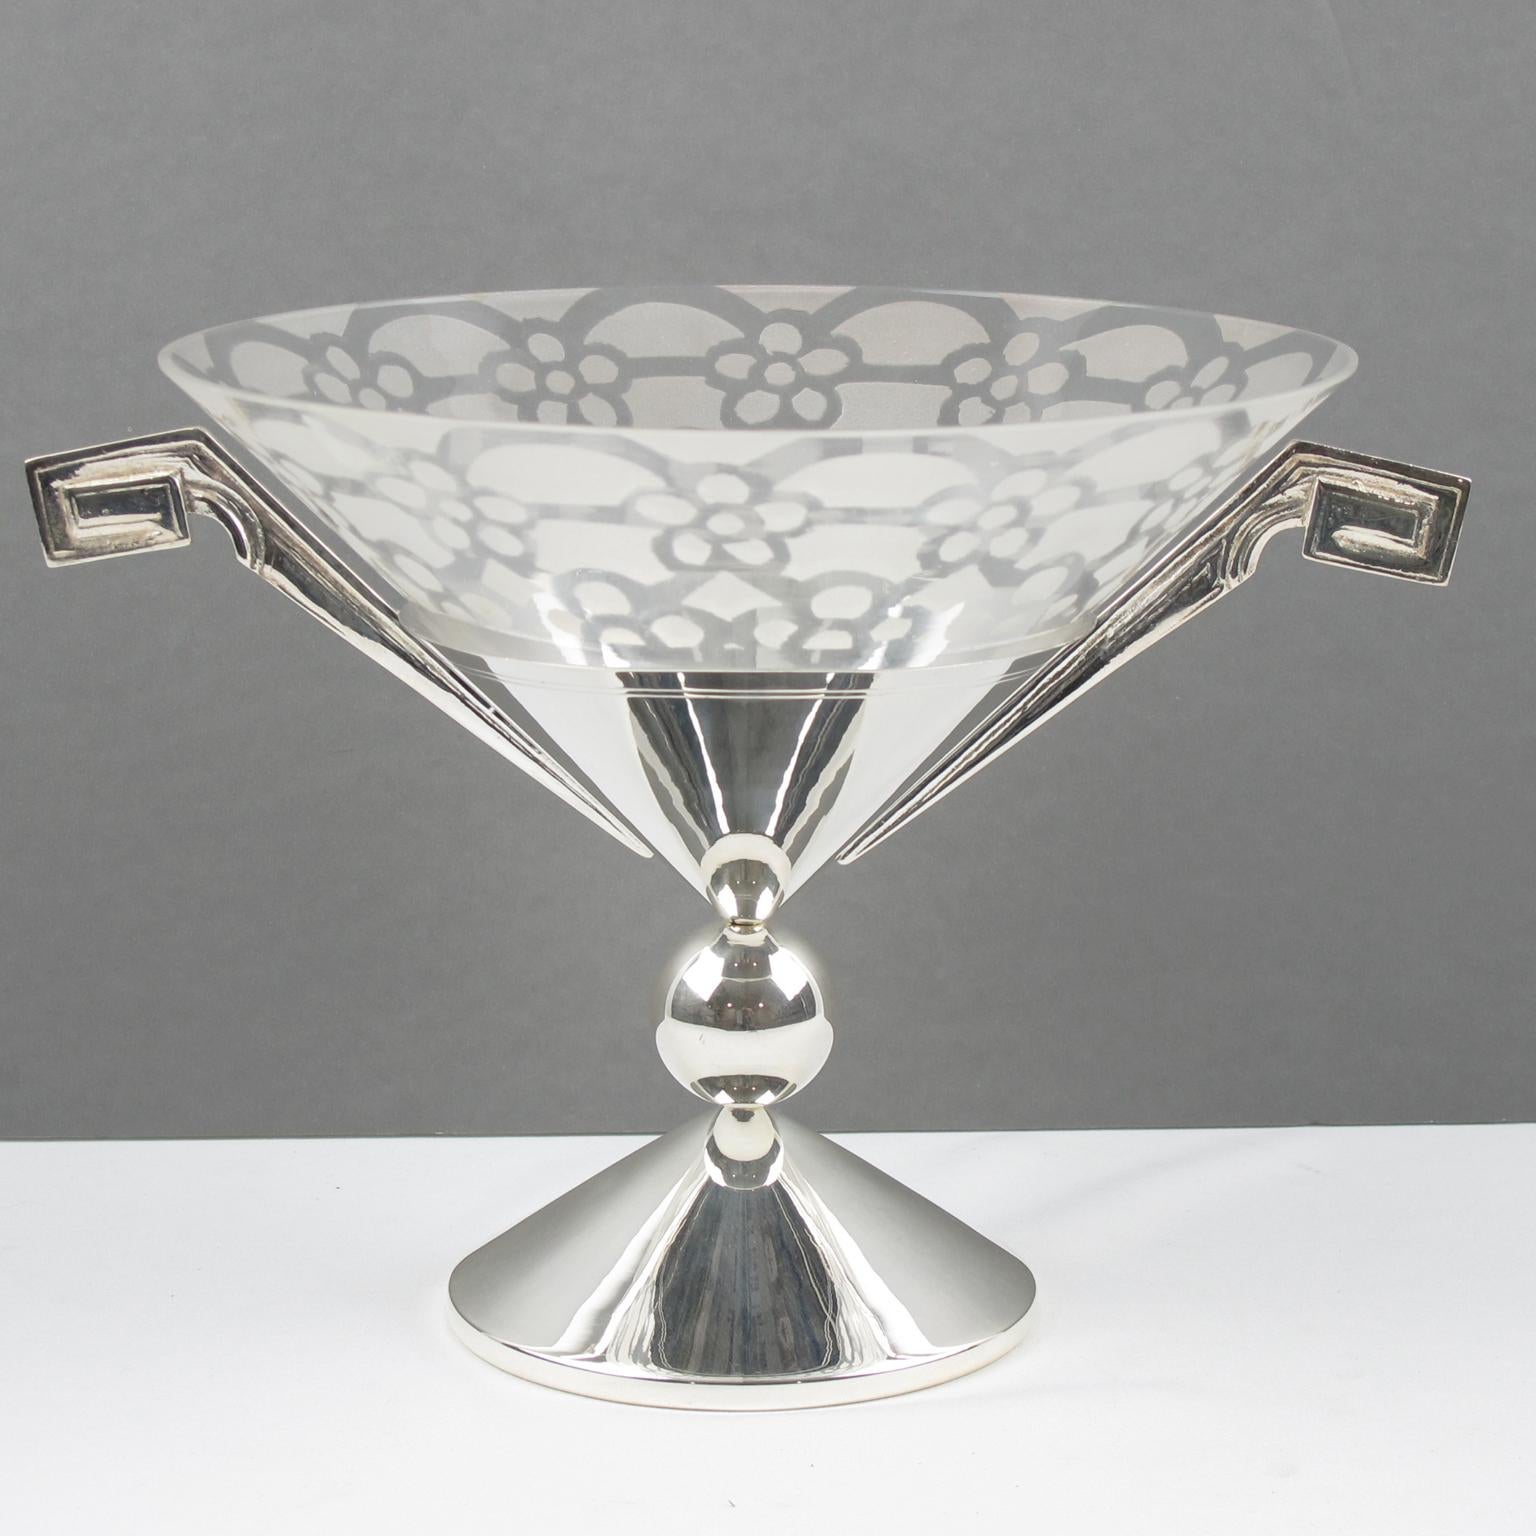 This stylish French Art Deco centerpiece or decorative bowl features a tall pedestal shape in silver plate metal with engraving and large geometric handles. The insert bowl is in transparent blown glass with an Art Deco geometric frosted etching all